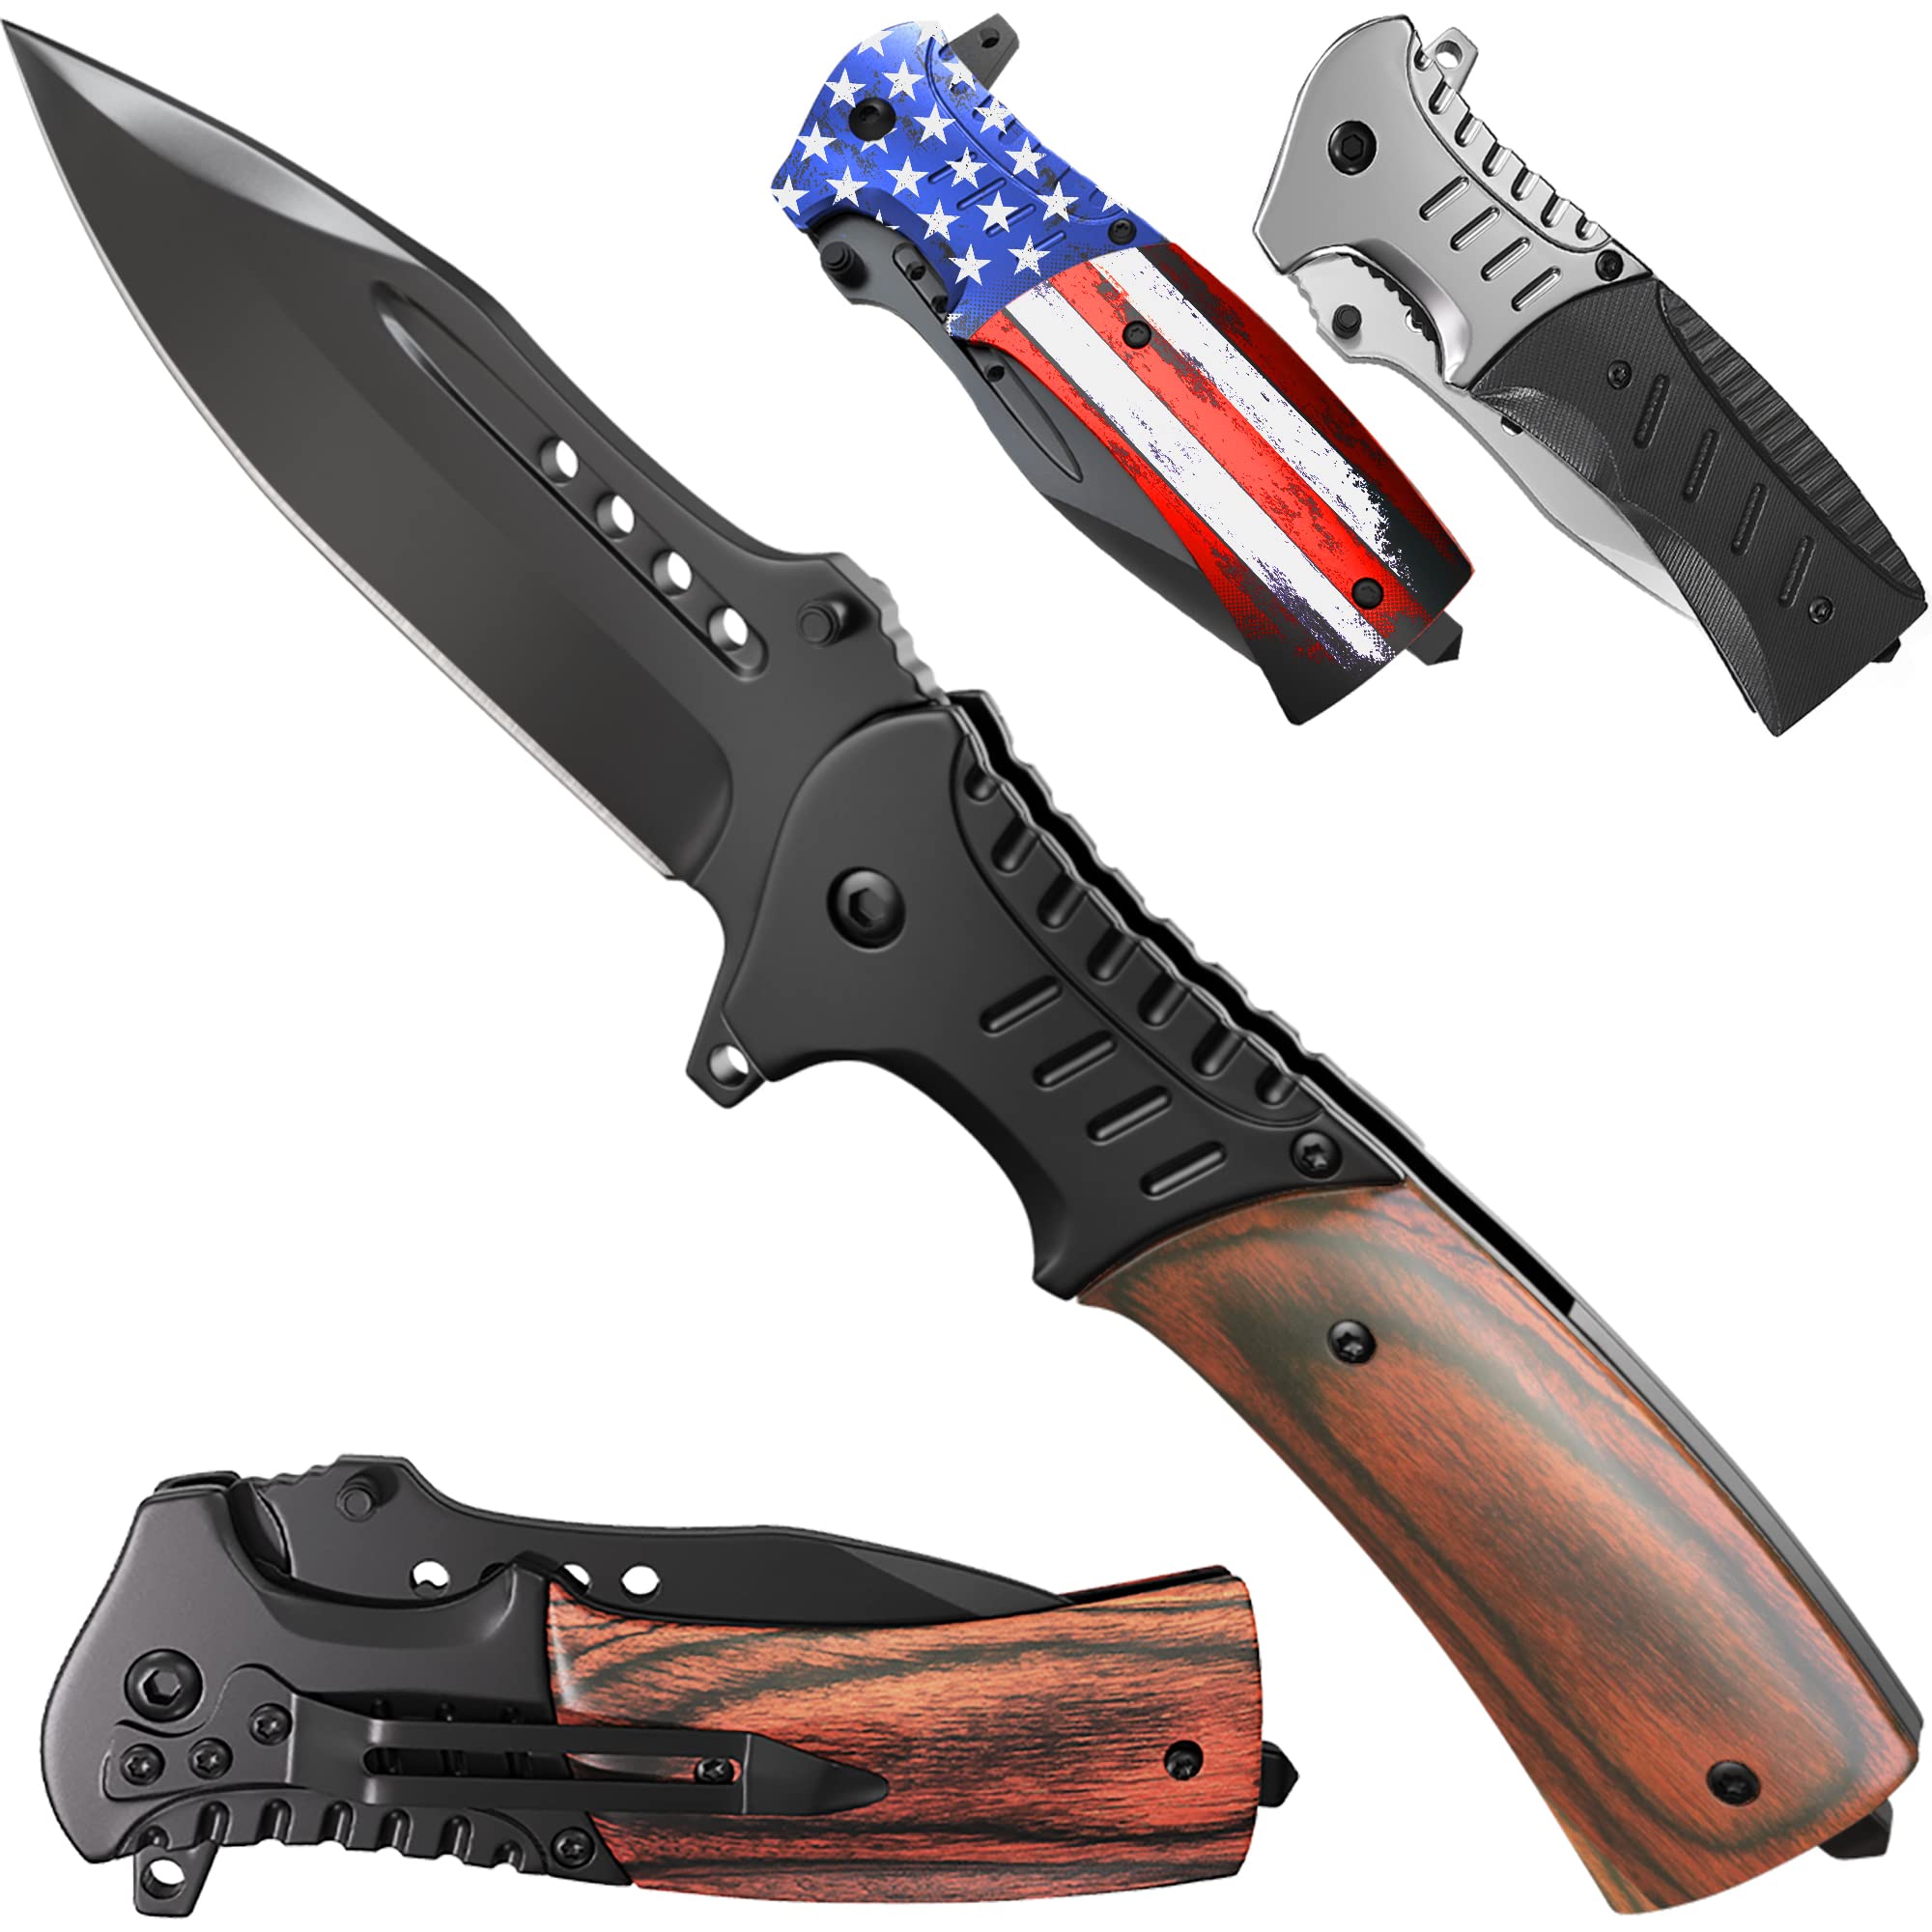 Pocket Knife Spring Assisted Folding Knives - Military EDC USMC Tactical  Jack Knifes - Best Camping Hunting Fishing Hiking Survival Knofe - Travel  Accessories Gear - Boy Scout Knife Gifts for Men 0207 1.Wood